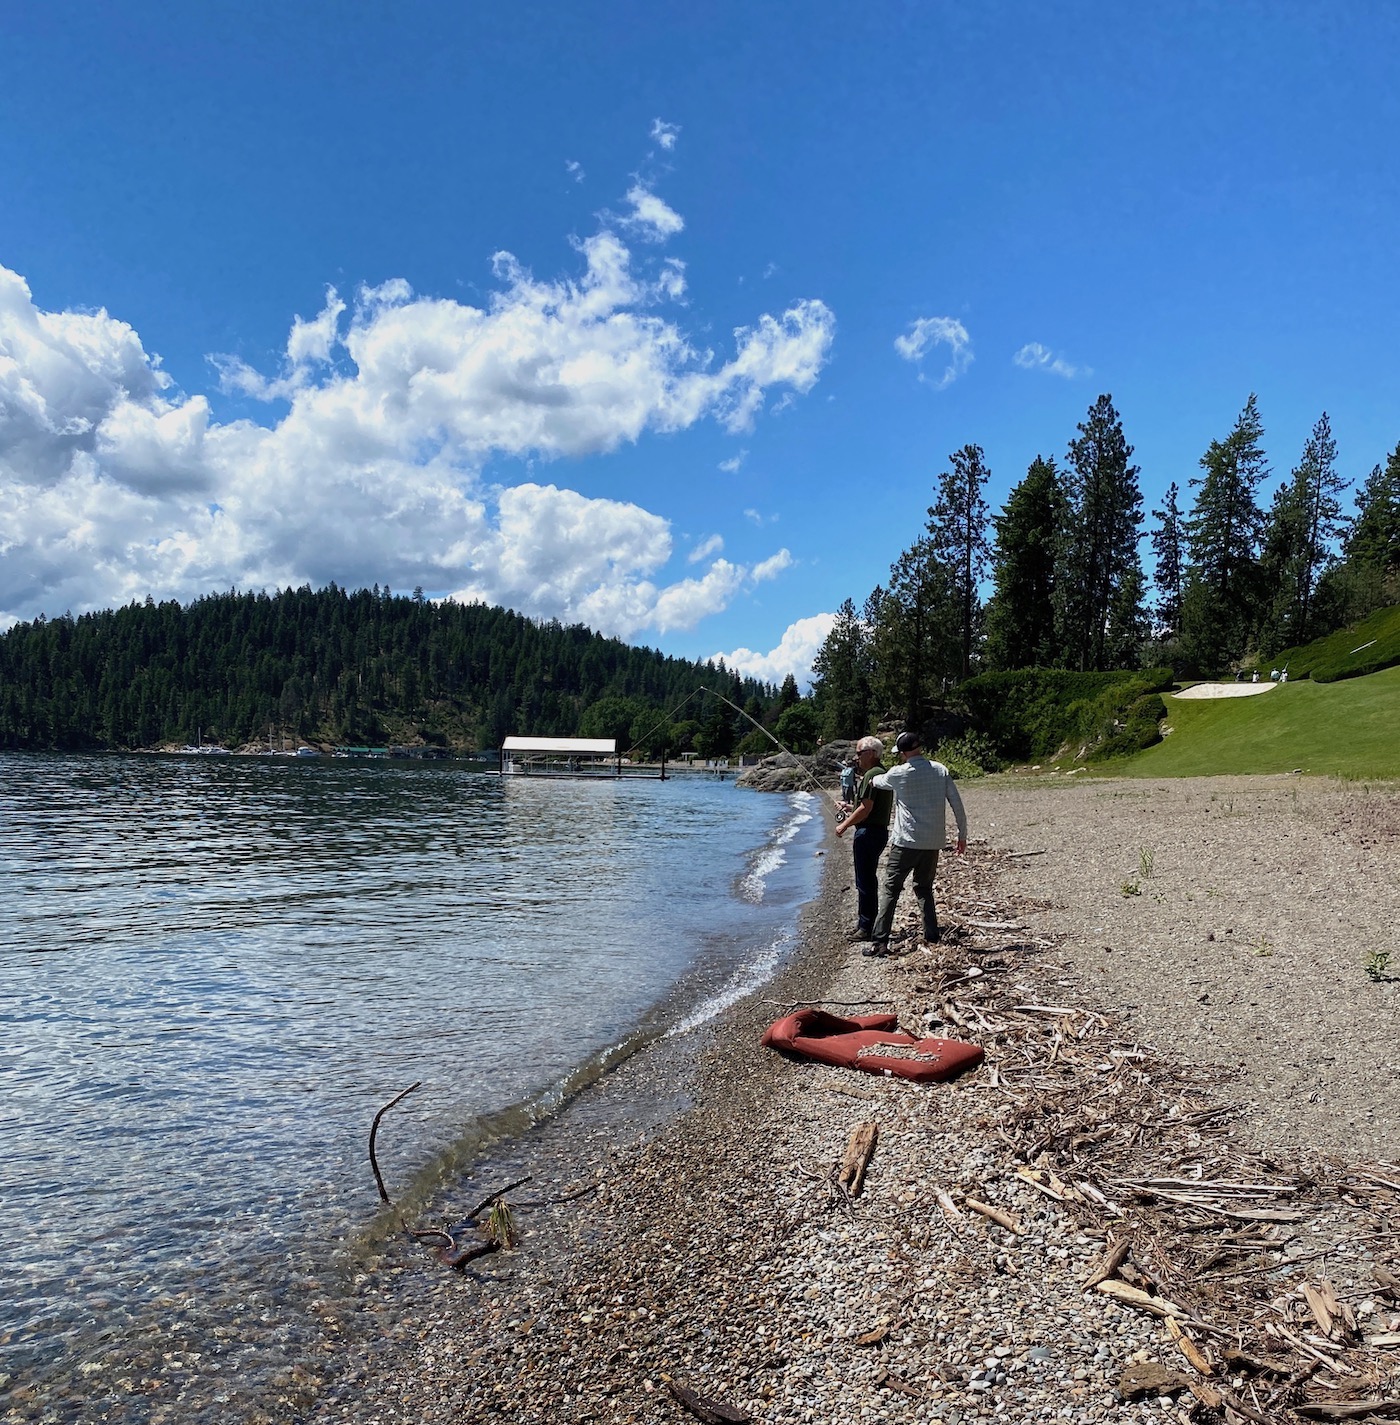 Practicing roll casting on Lake Coeur DAlene